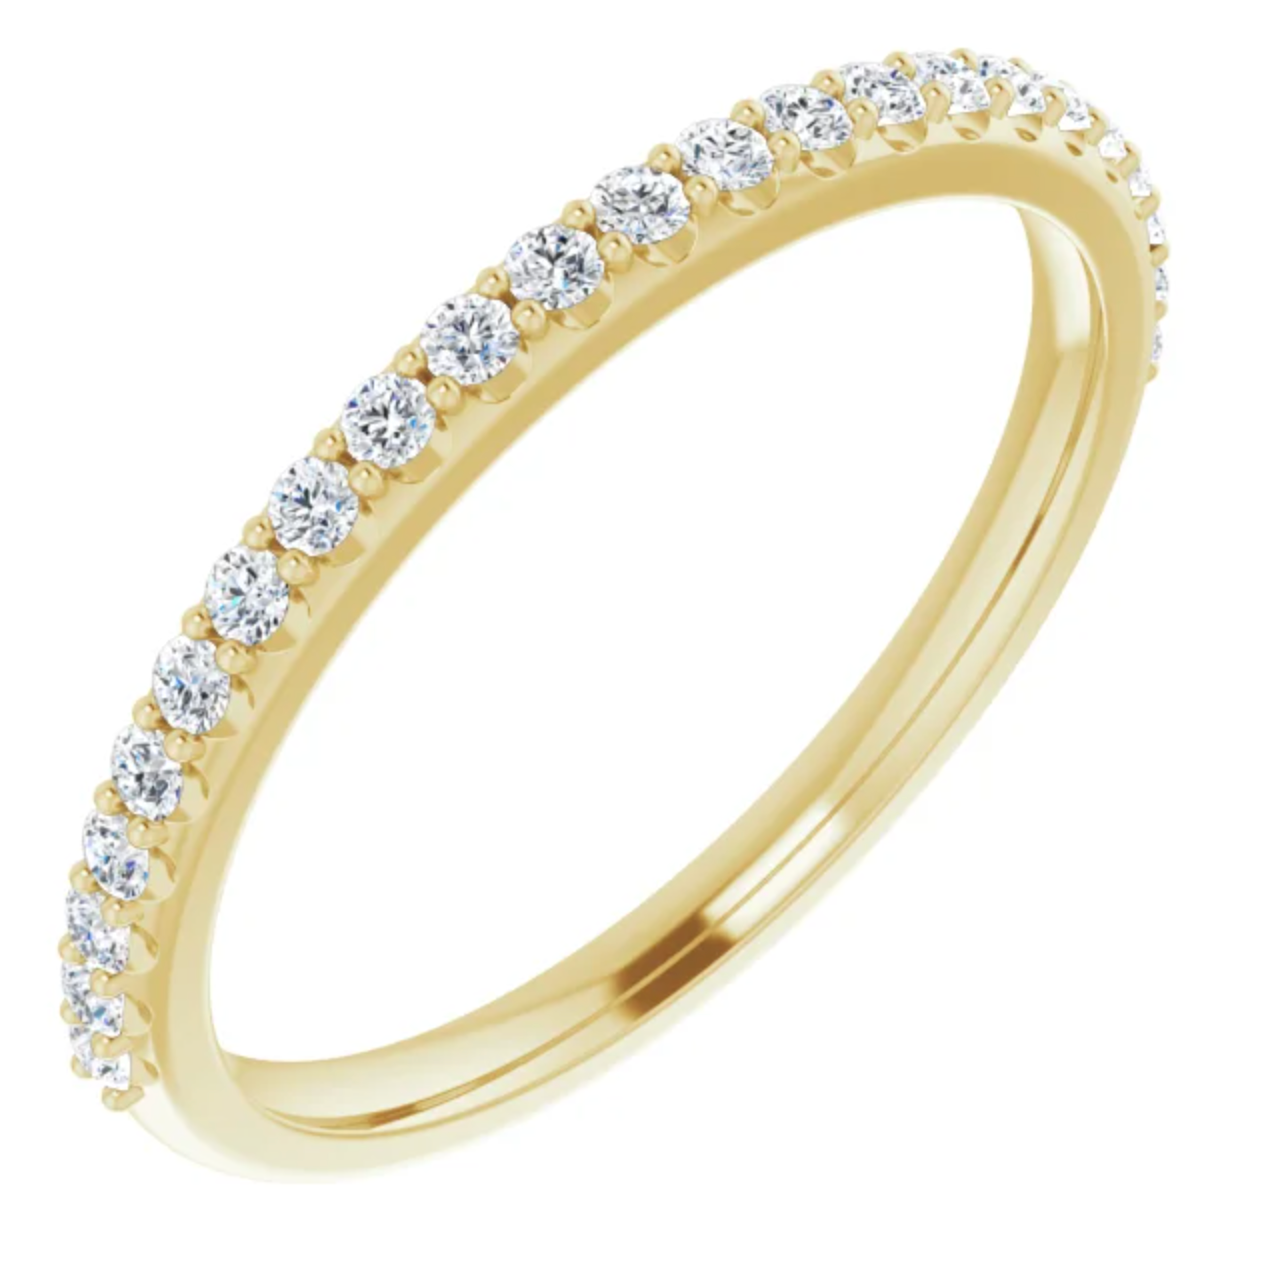 Load image into Gallery viewer, 14k yellow gold diamond half eternity band, close up on white background.
